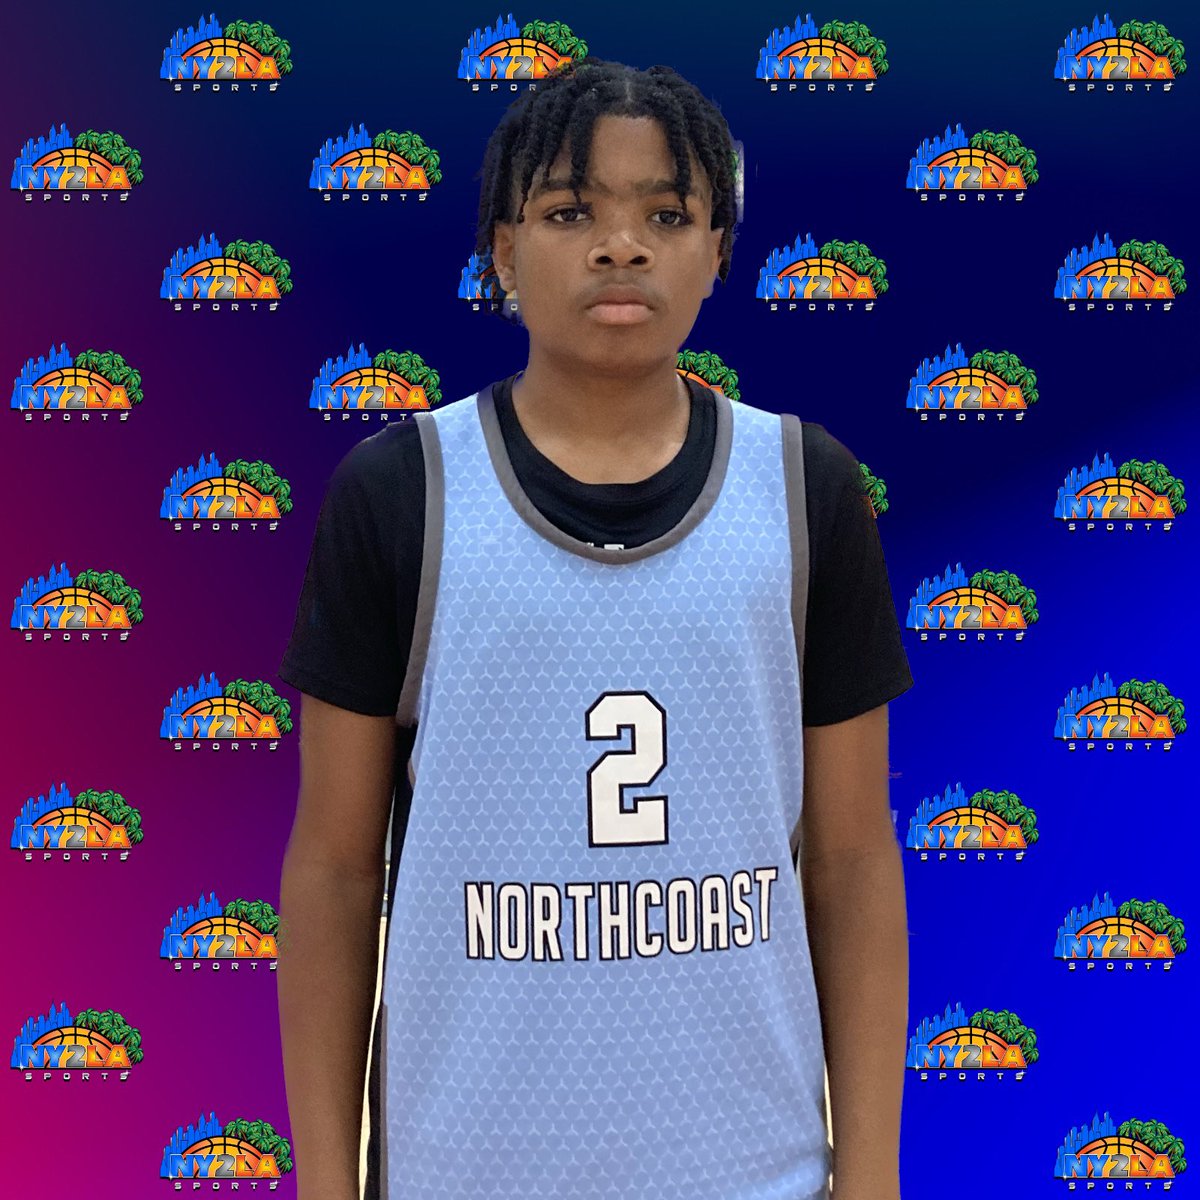 As well to scoring it well from both on the attack and outside, Aamir Johnson showcased a well rounded game at a young age. Played well running the point as well to his versatile defense. @NorthcoastAAU @ny2lasports @GNBABASKETBALL